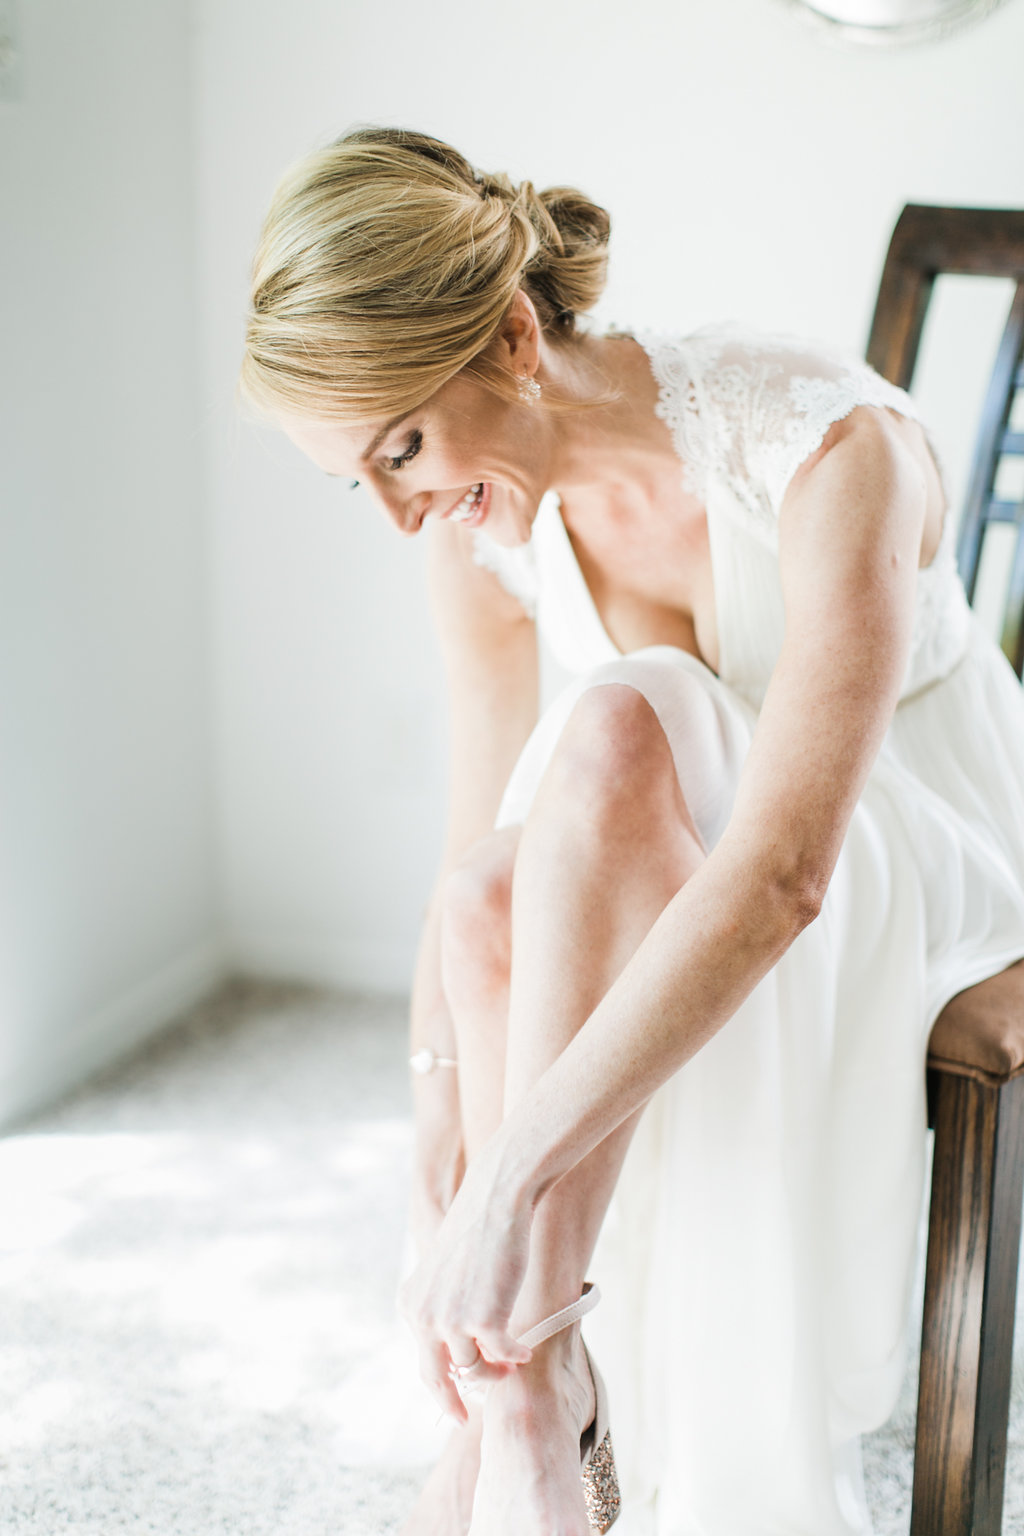 The whole room gasped when she slipped into her BHLDN wedding dress.